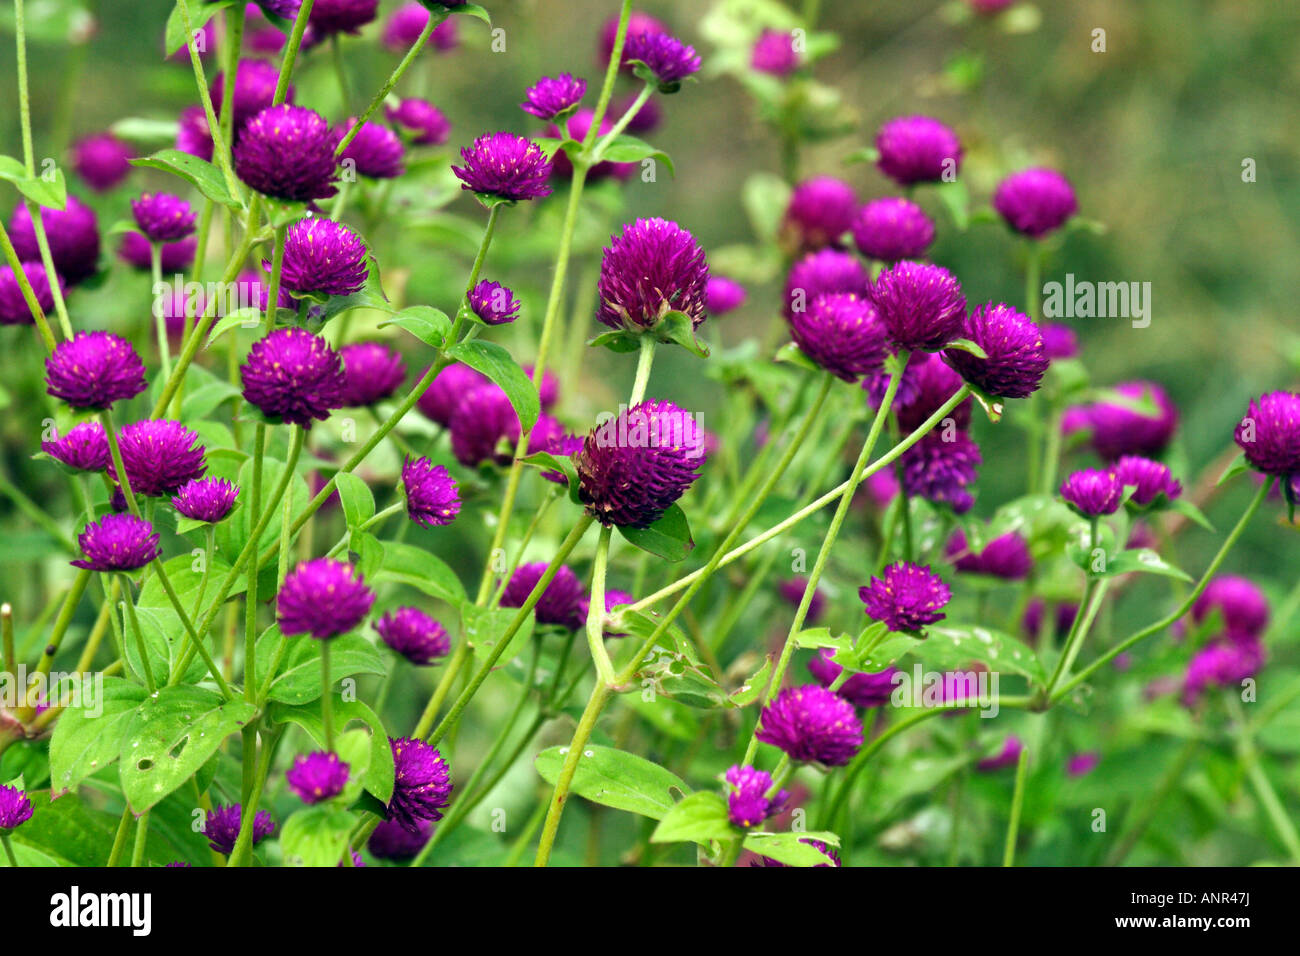 Gomphrena flowers in bloom Stock Photo